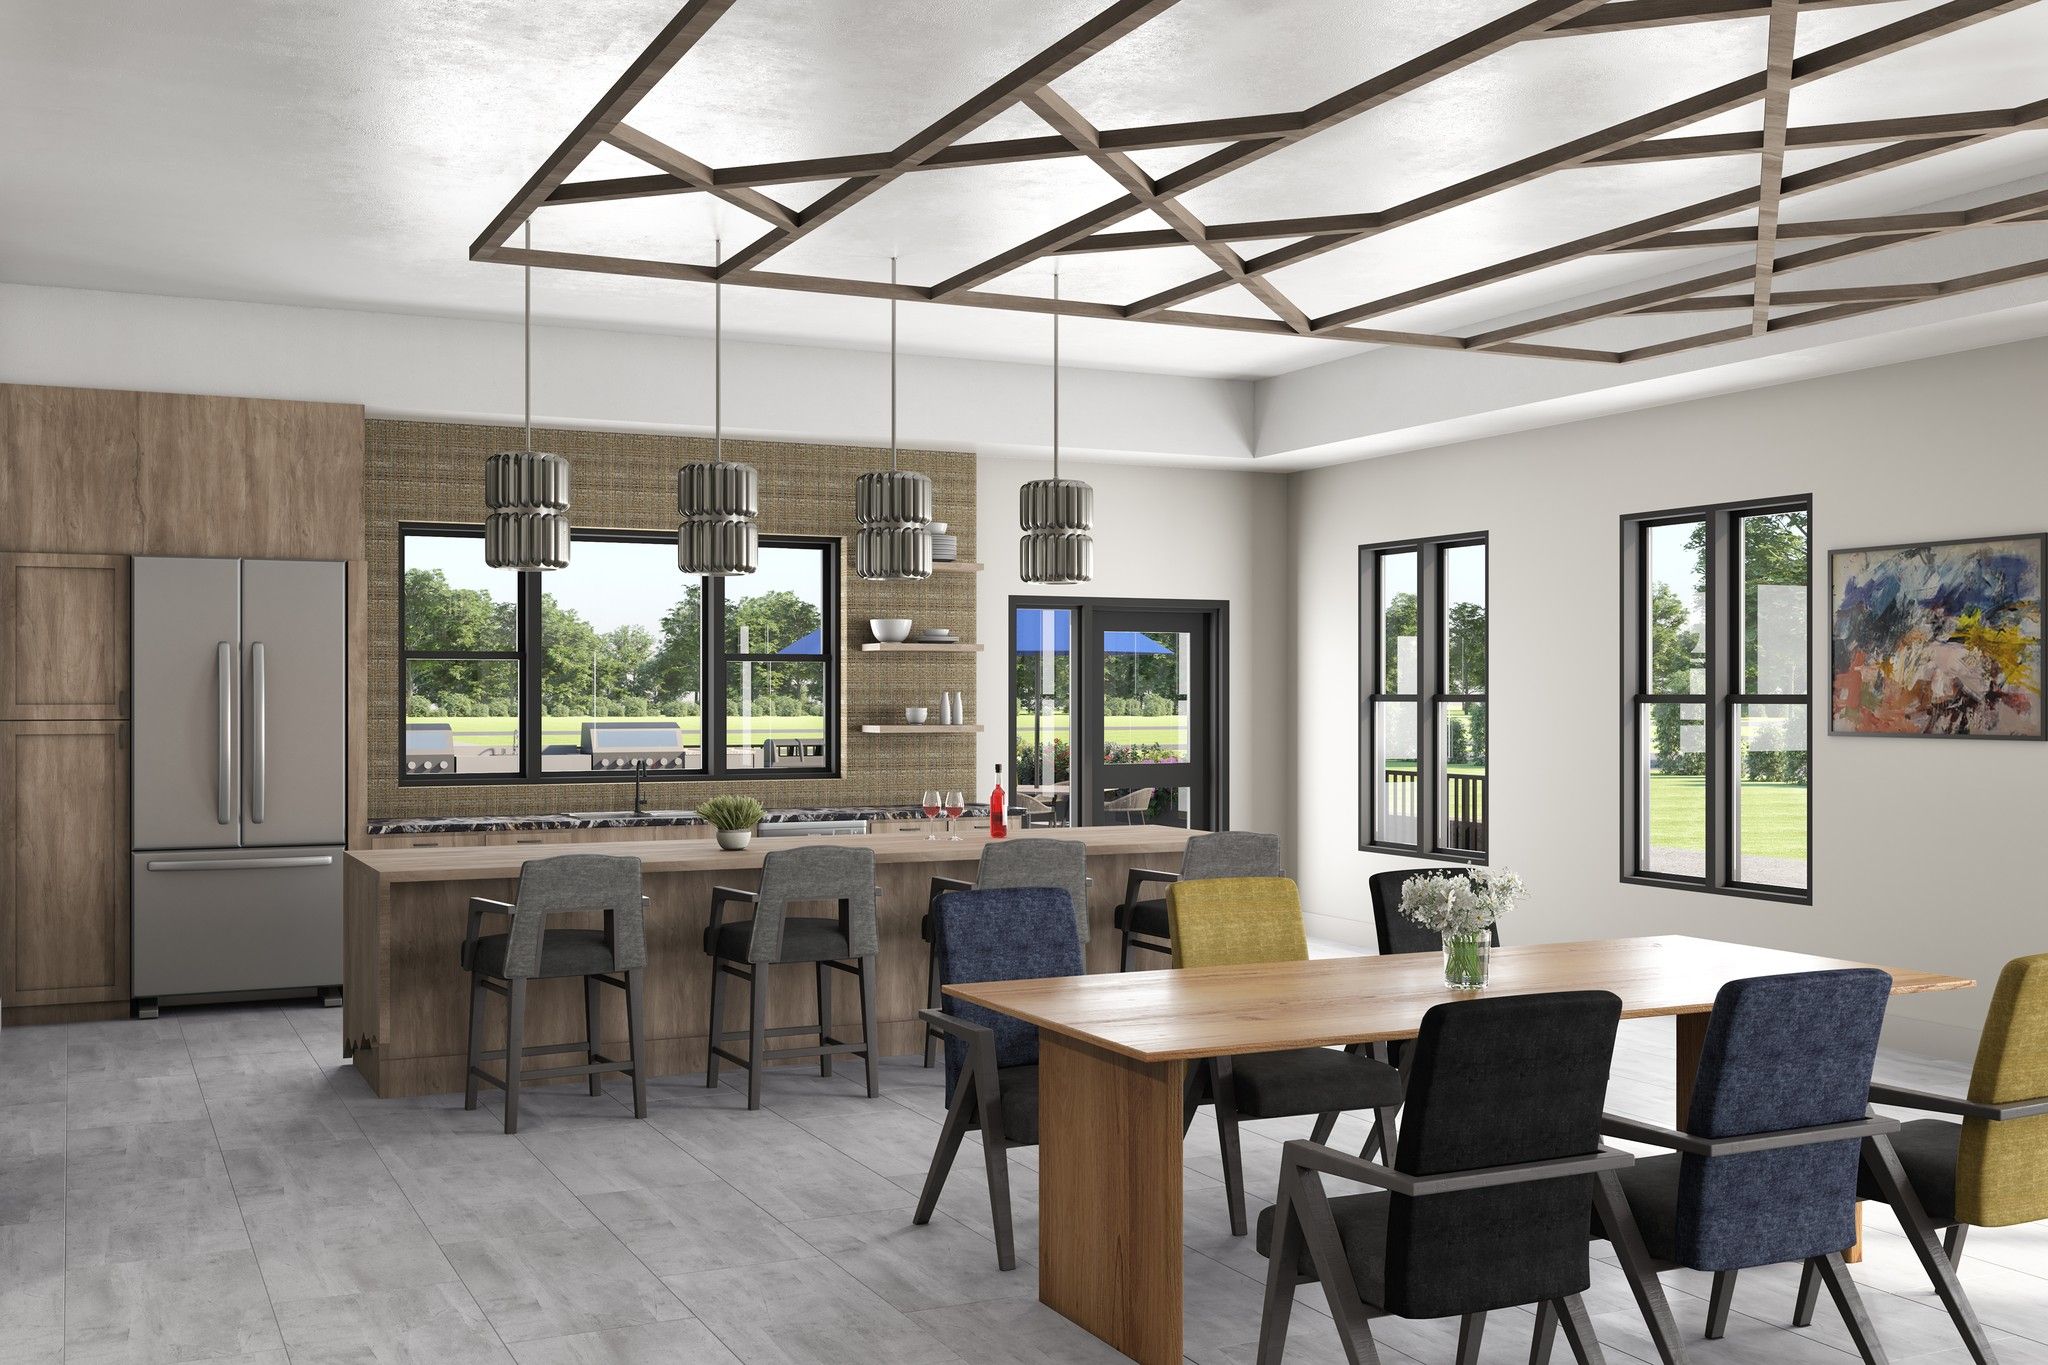 Rendering of The Lounge amenity at Slate Apartments with room for entertainment and a kitchen island for hosting